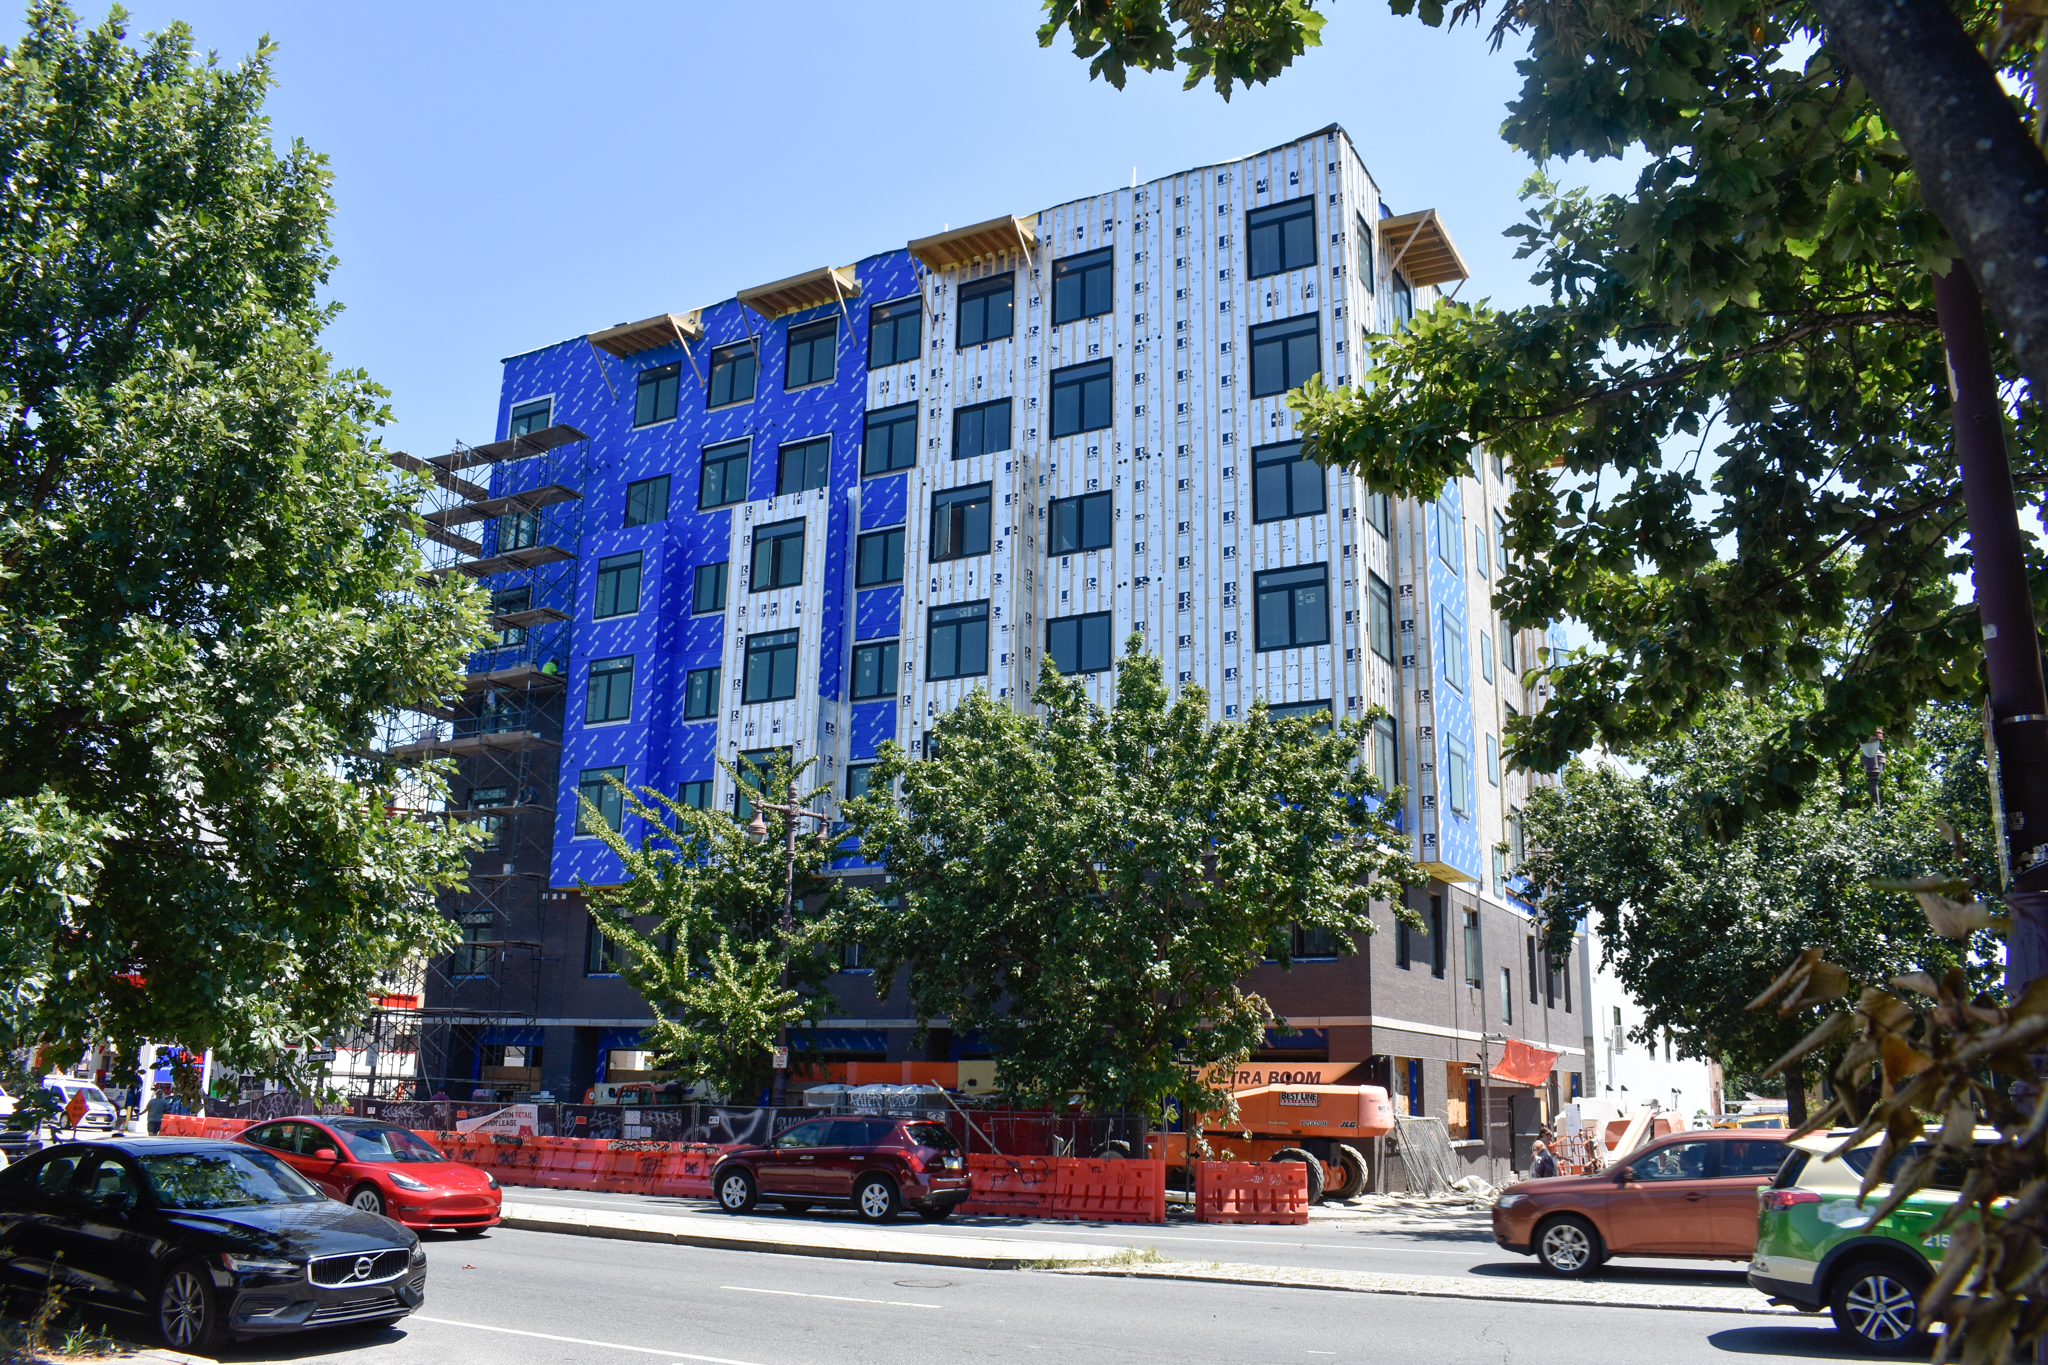 Broad Street Flats at 701 South Broad Street. Photo by Jamie Meller. August 2022